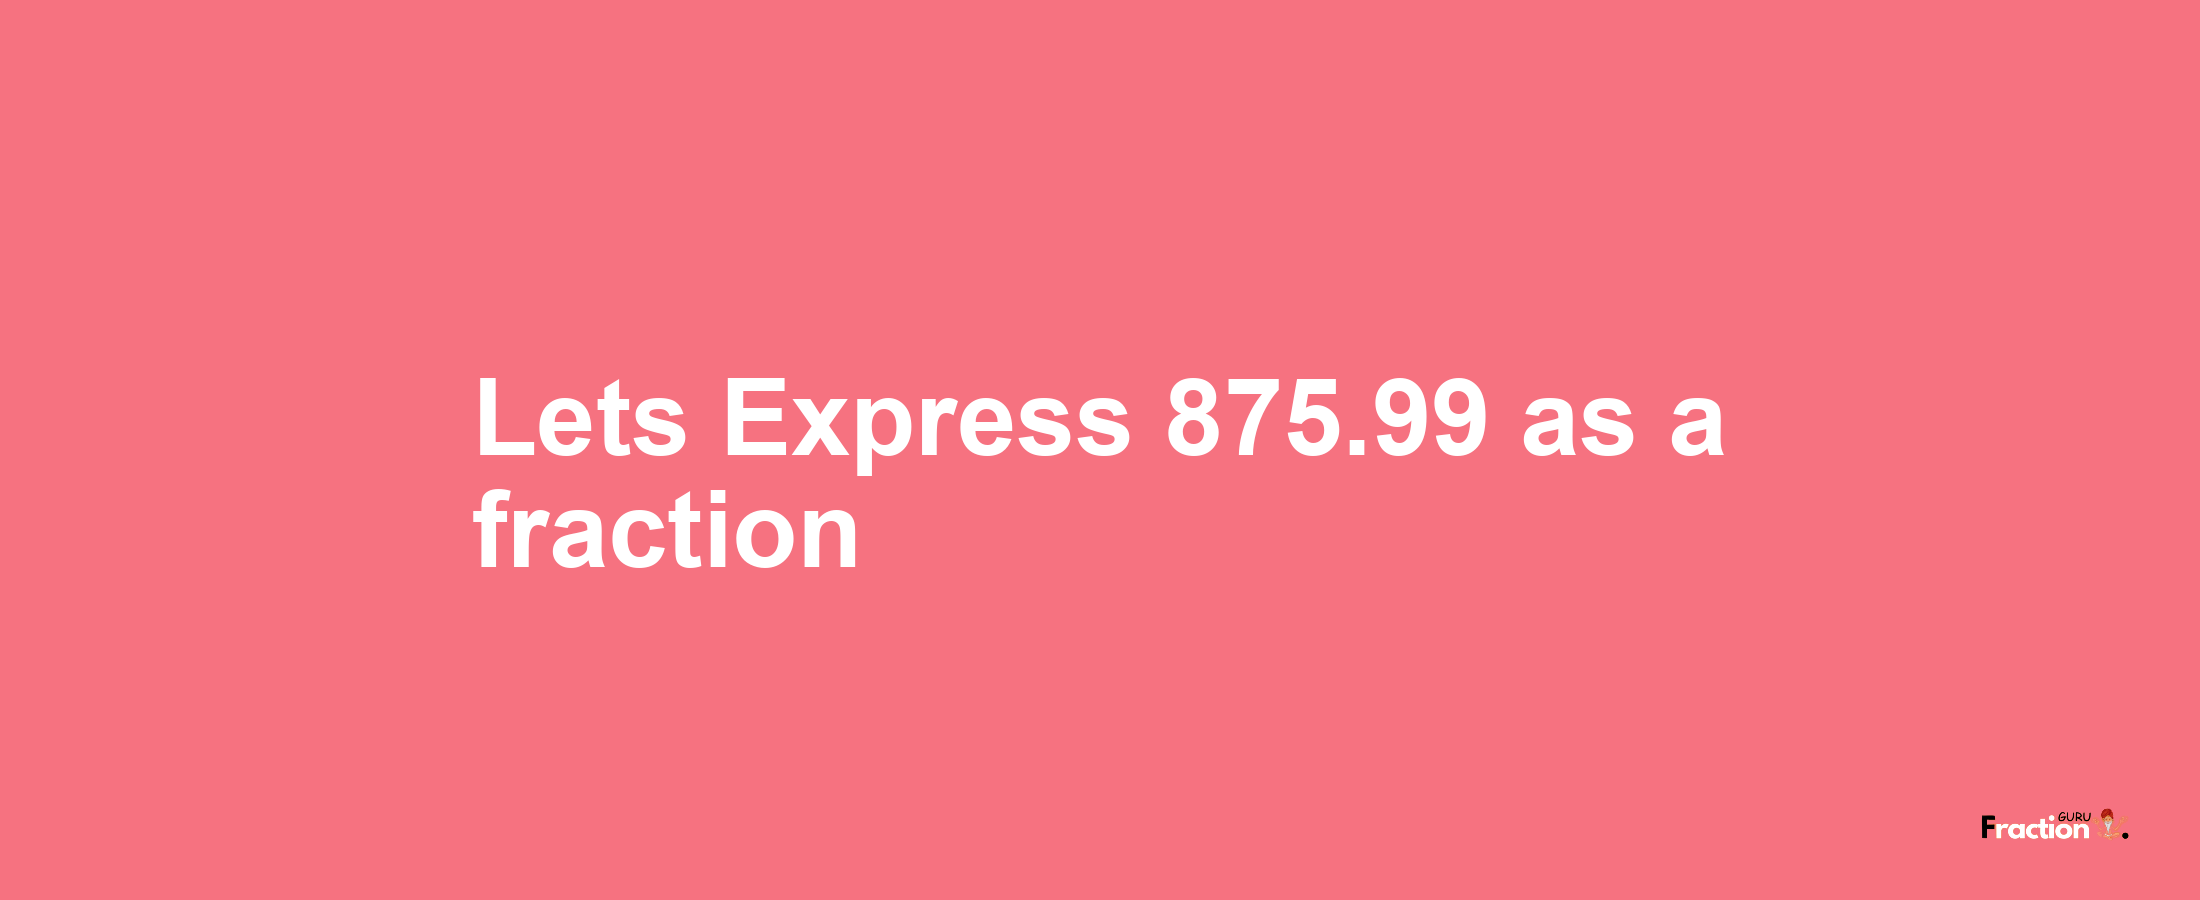 Lets Express 875.99 as afraction